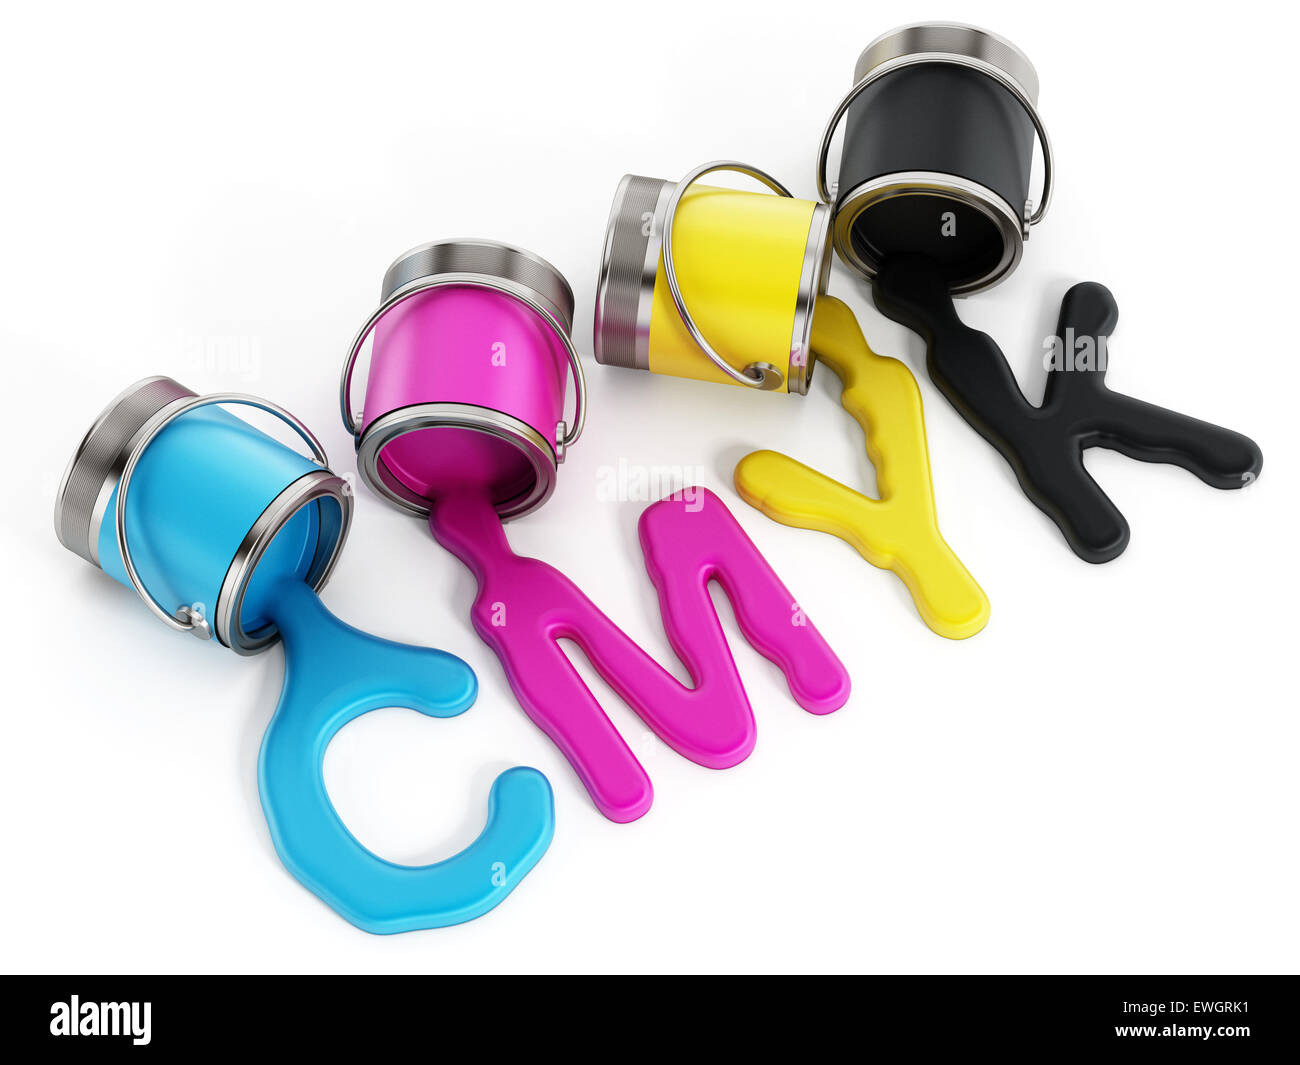 CMYK buckets with cyan, magenta, yellow and black inks Stock Photo